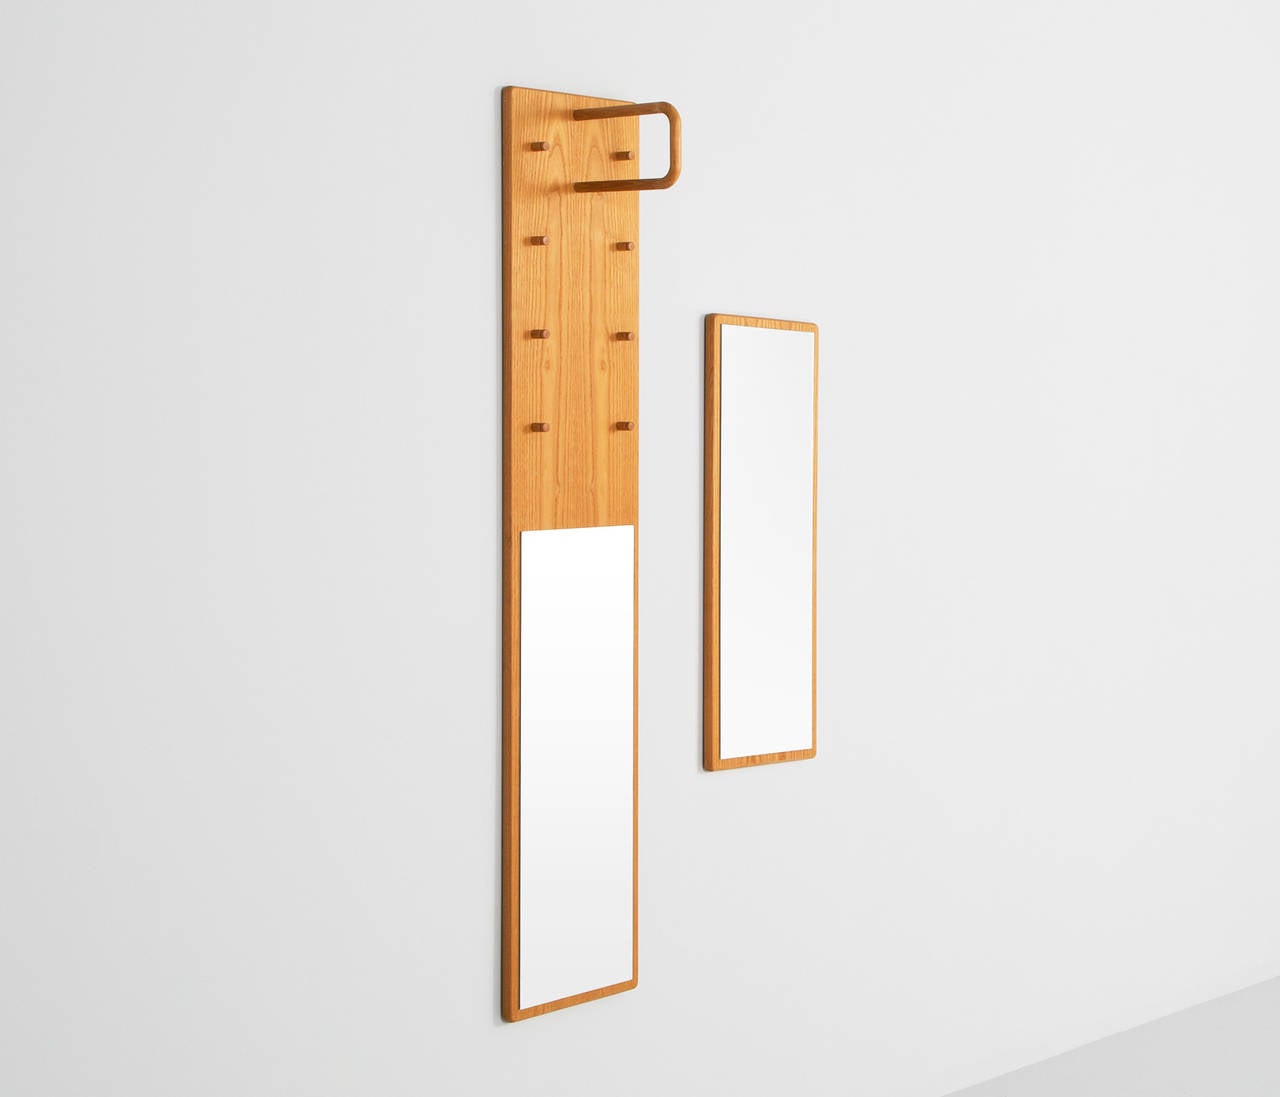 Mirror with coat stand, pine and mirror, Sweden, 1970s

Swedish designed rectangular shaped mirror with a nice coat stand function in pine wood. The design is typical Scandinavian, modest, functional, yet of high quality.
 